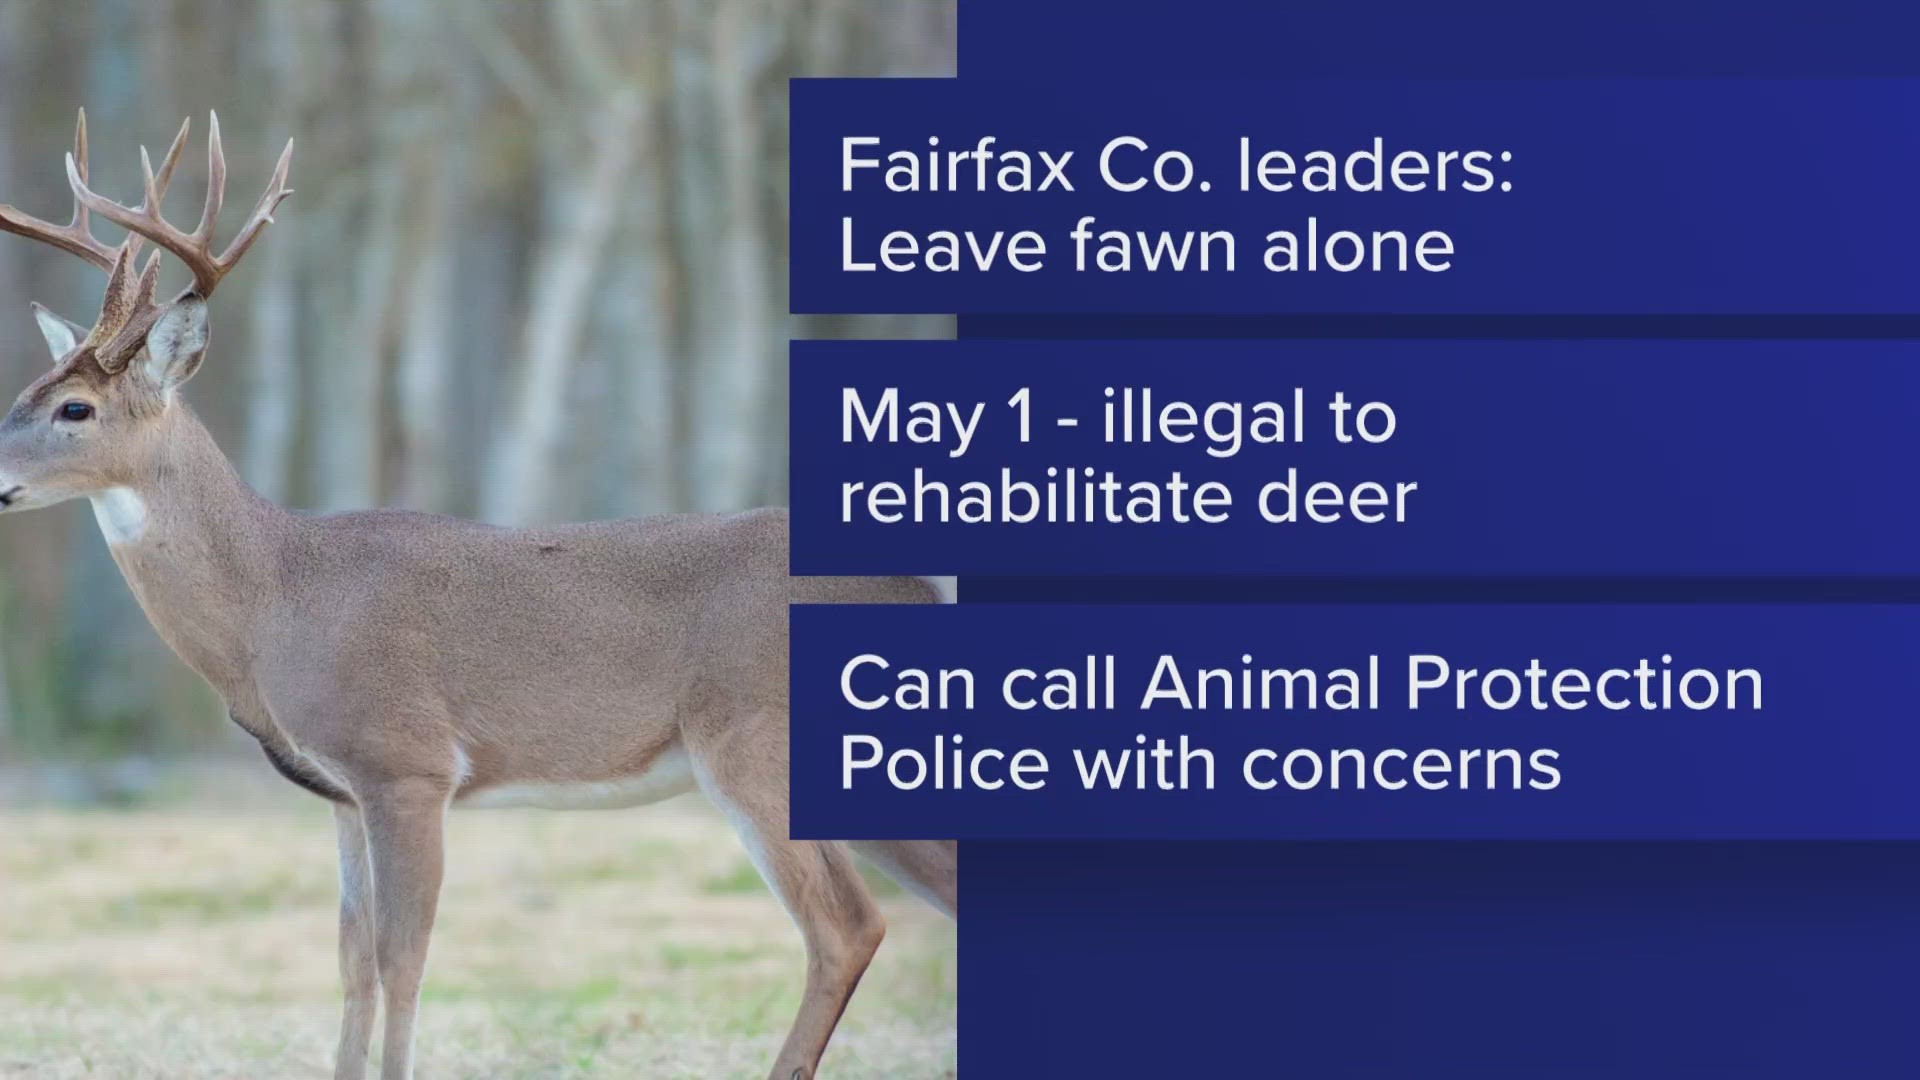 Newborn fawns are often found on lawns, in flower beds, gardens, bushes or areas of tall grass near homes. For their own welfare, leave them be.